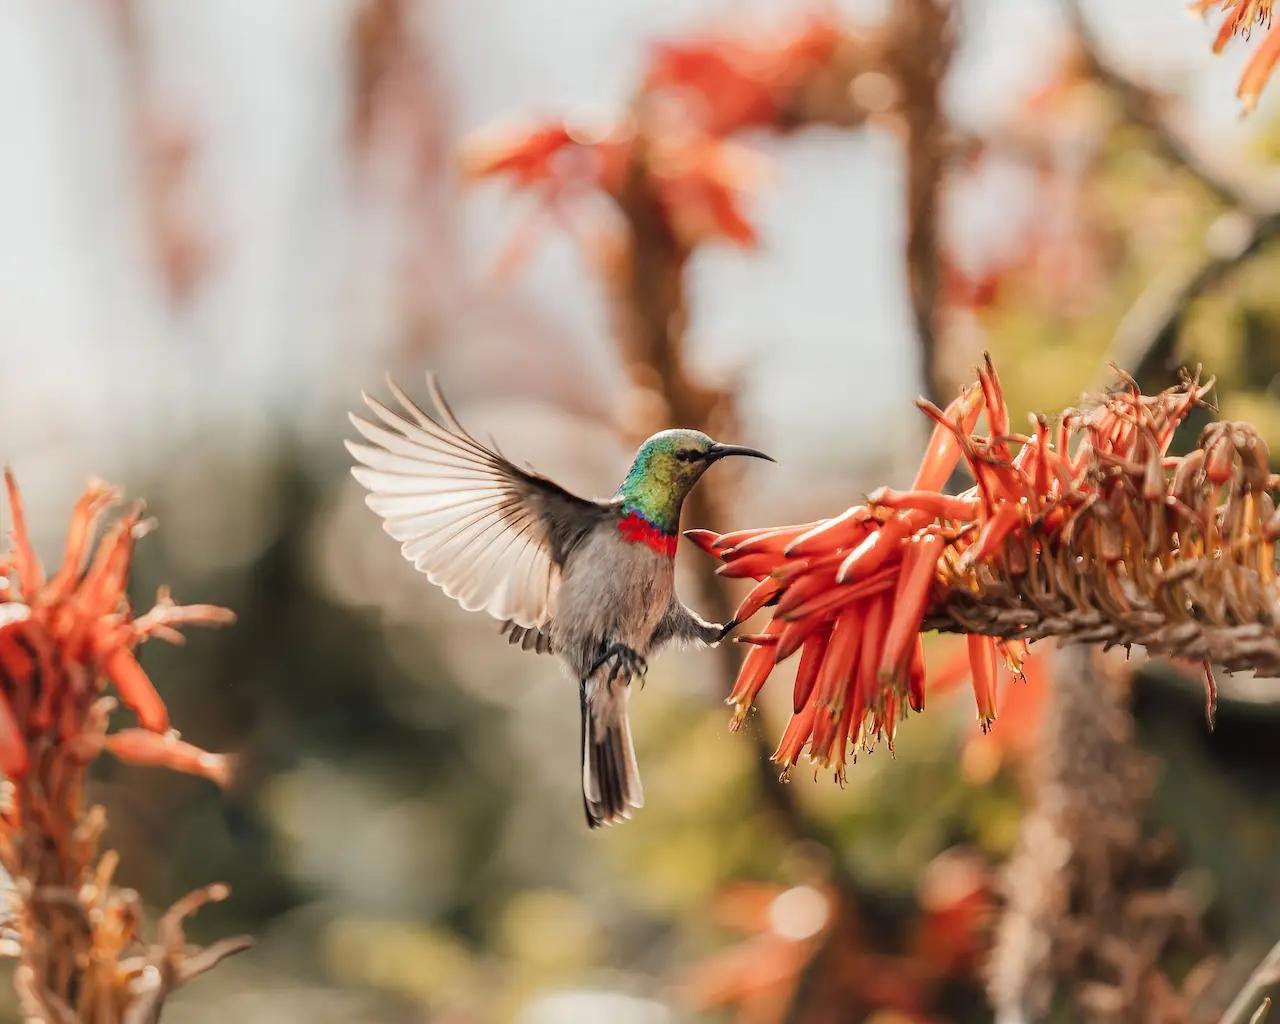 The Southern Double-Collared Sunbirds Feeding Itself